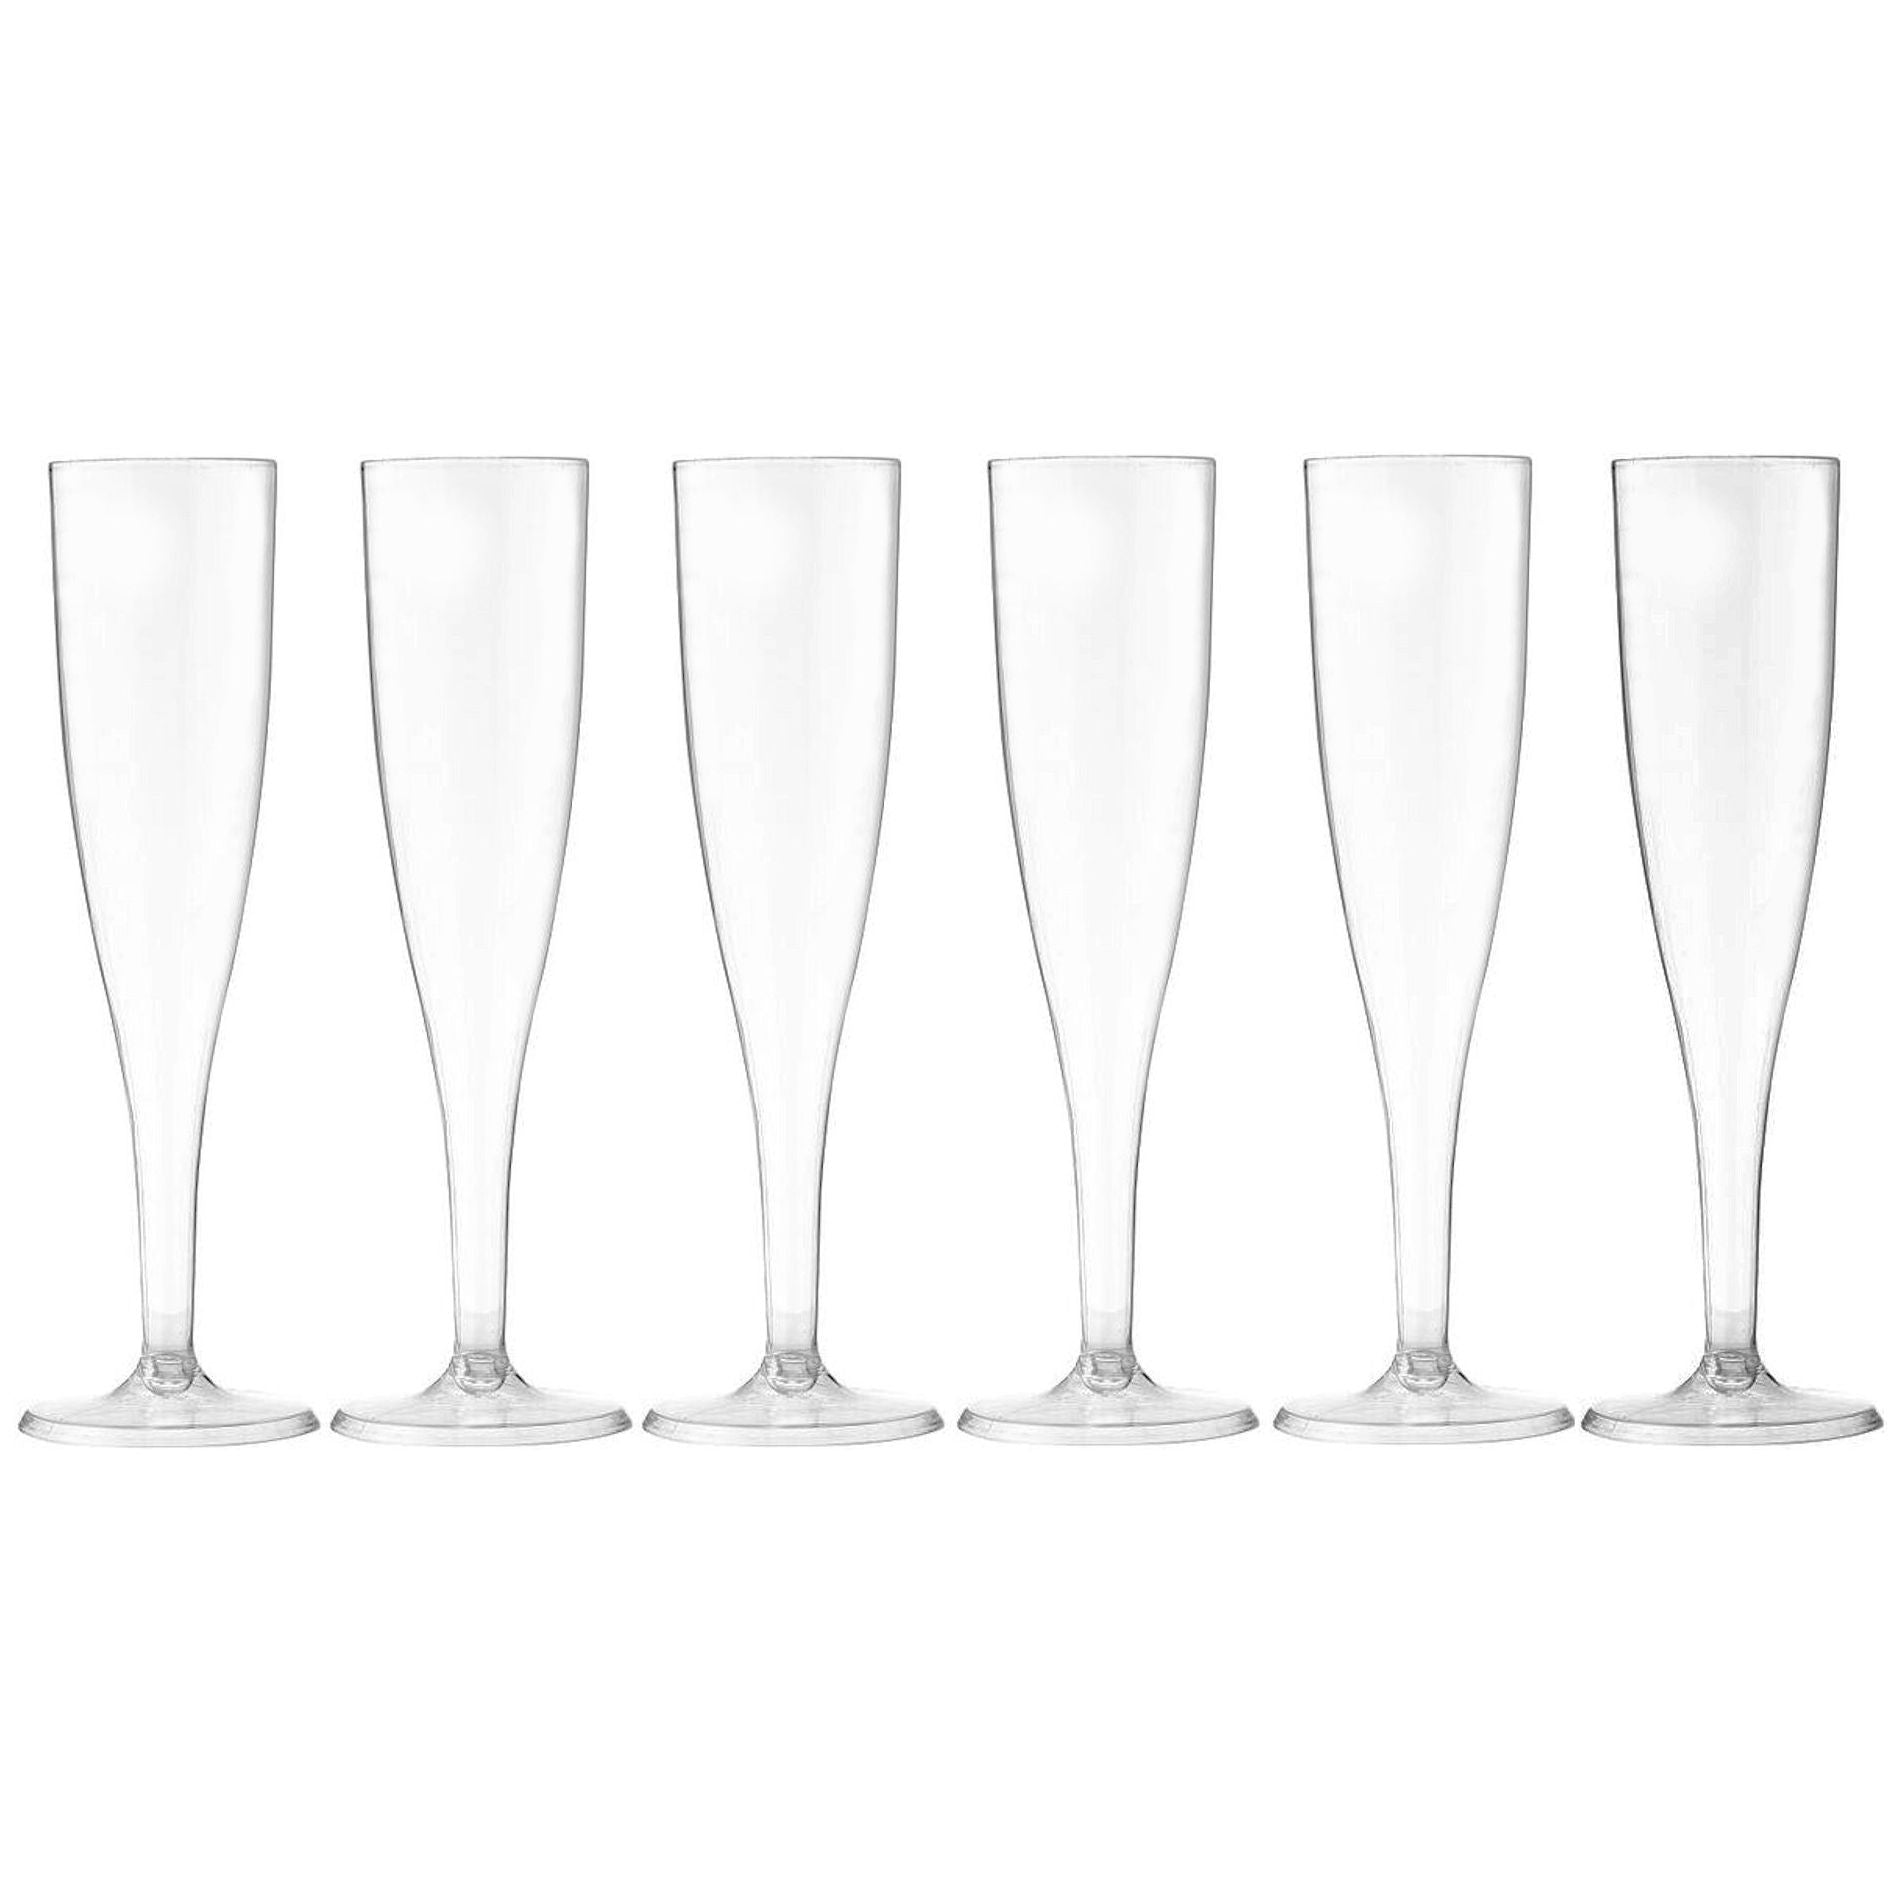 Disposable Champagne Glasses - 6 Pack